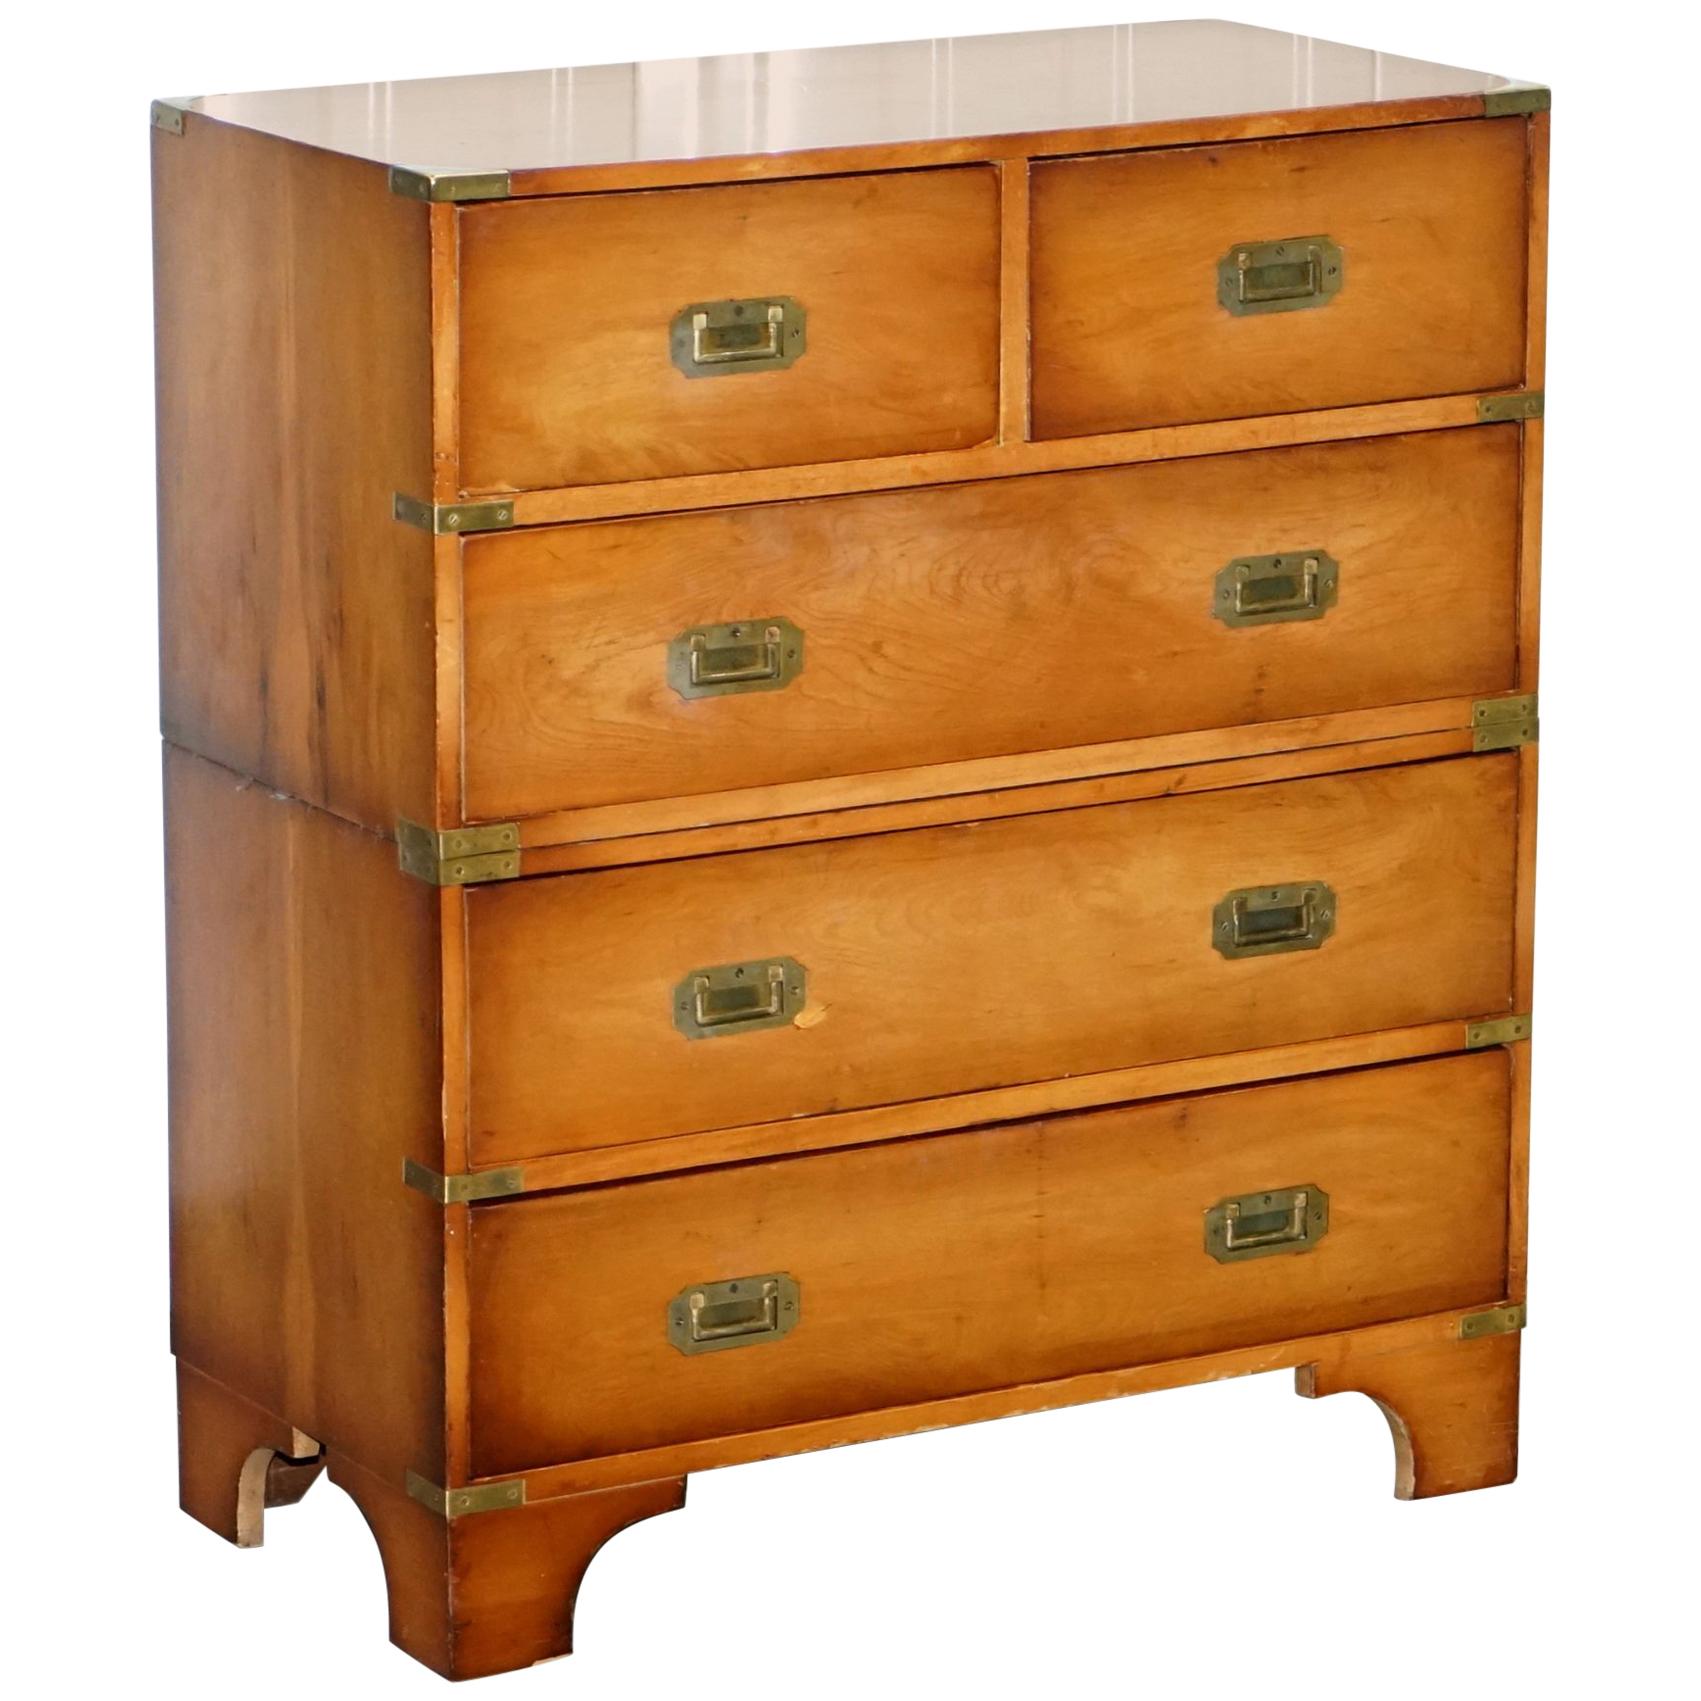 Wonderful Yew Wood Vintage Military Campaign Chest of Drawers Two Piece Set